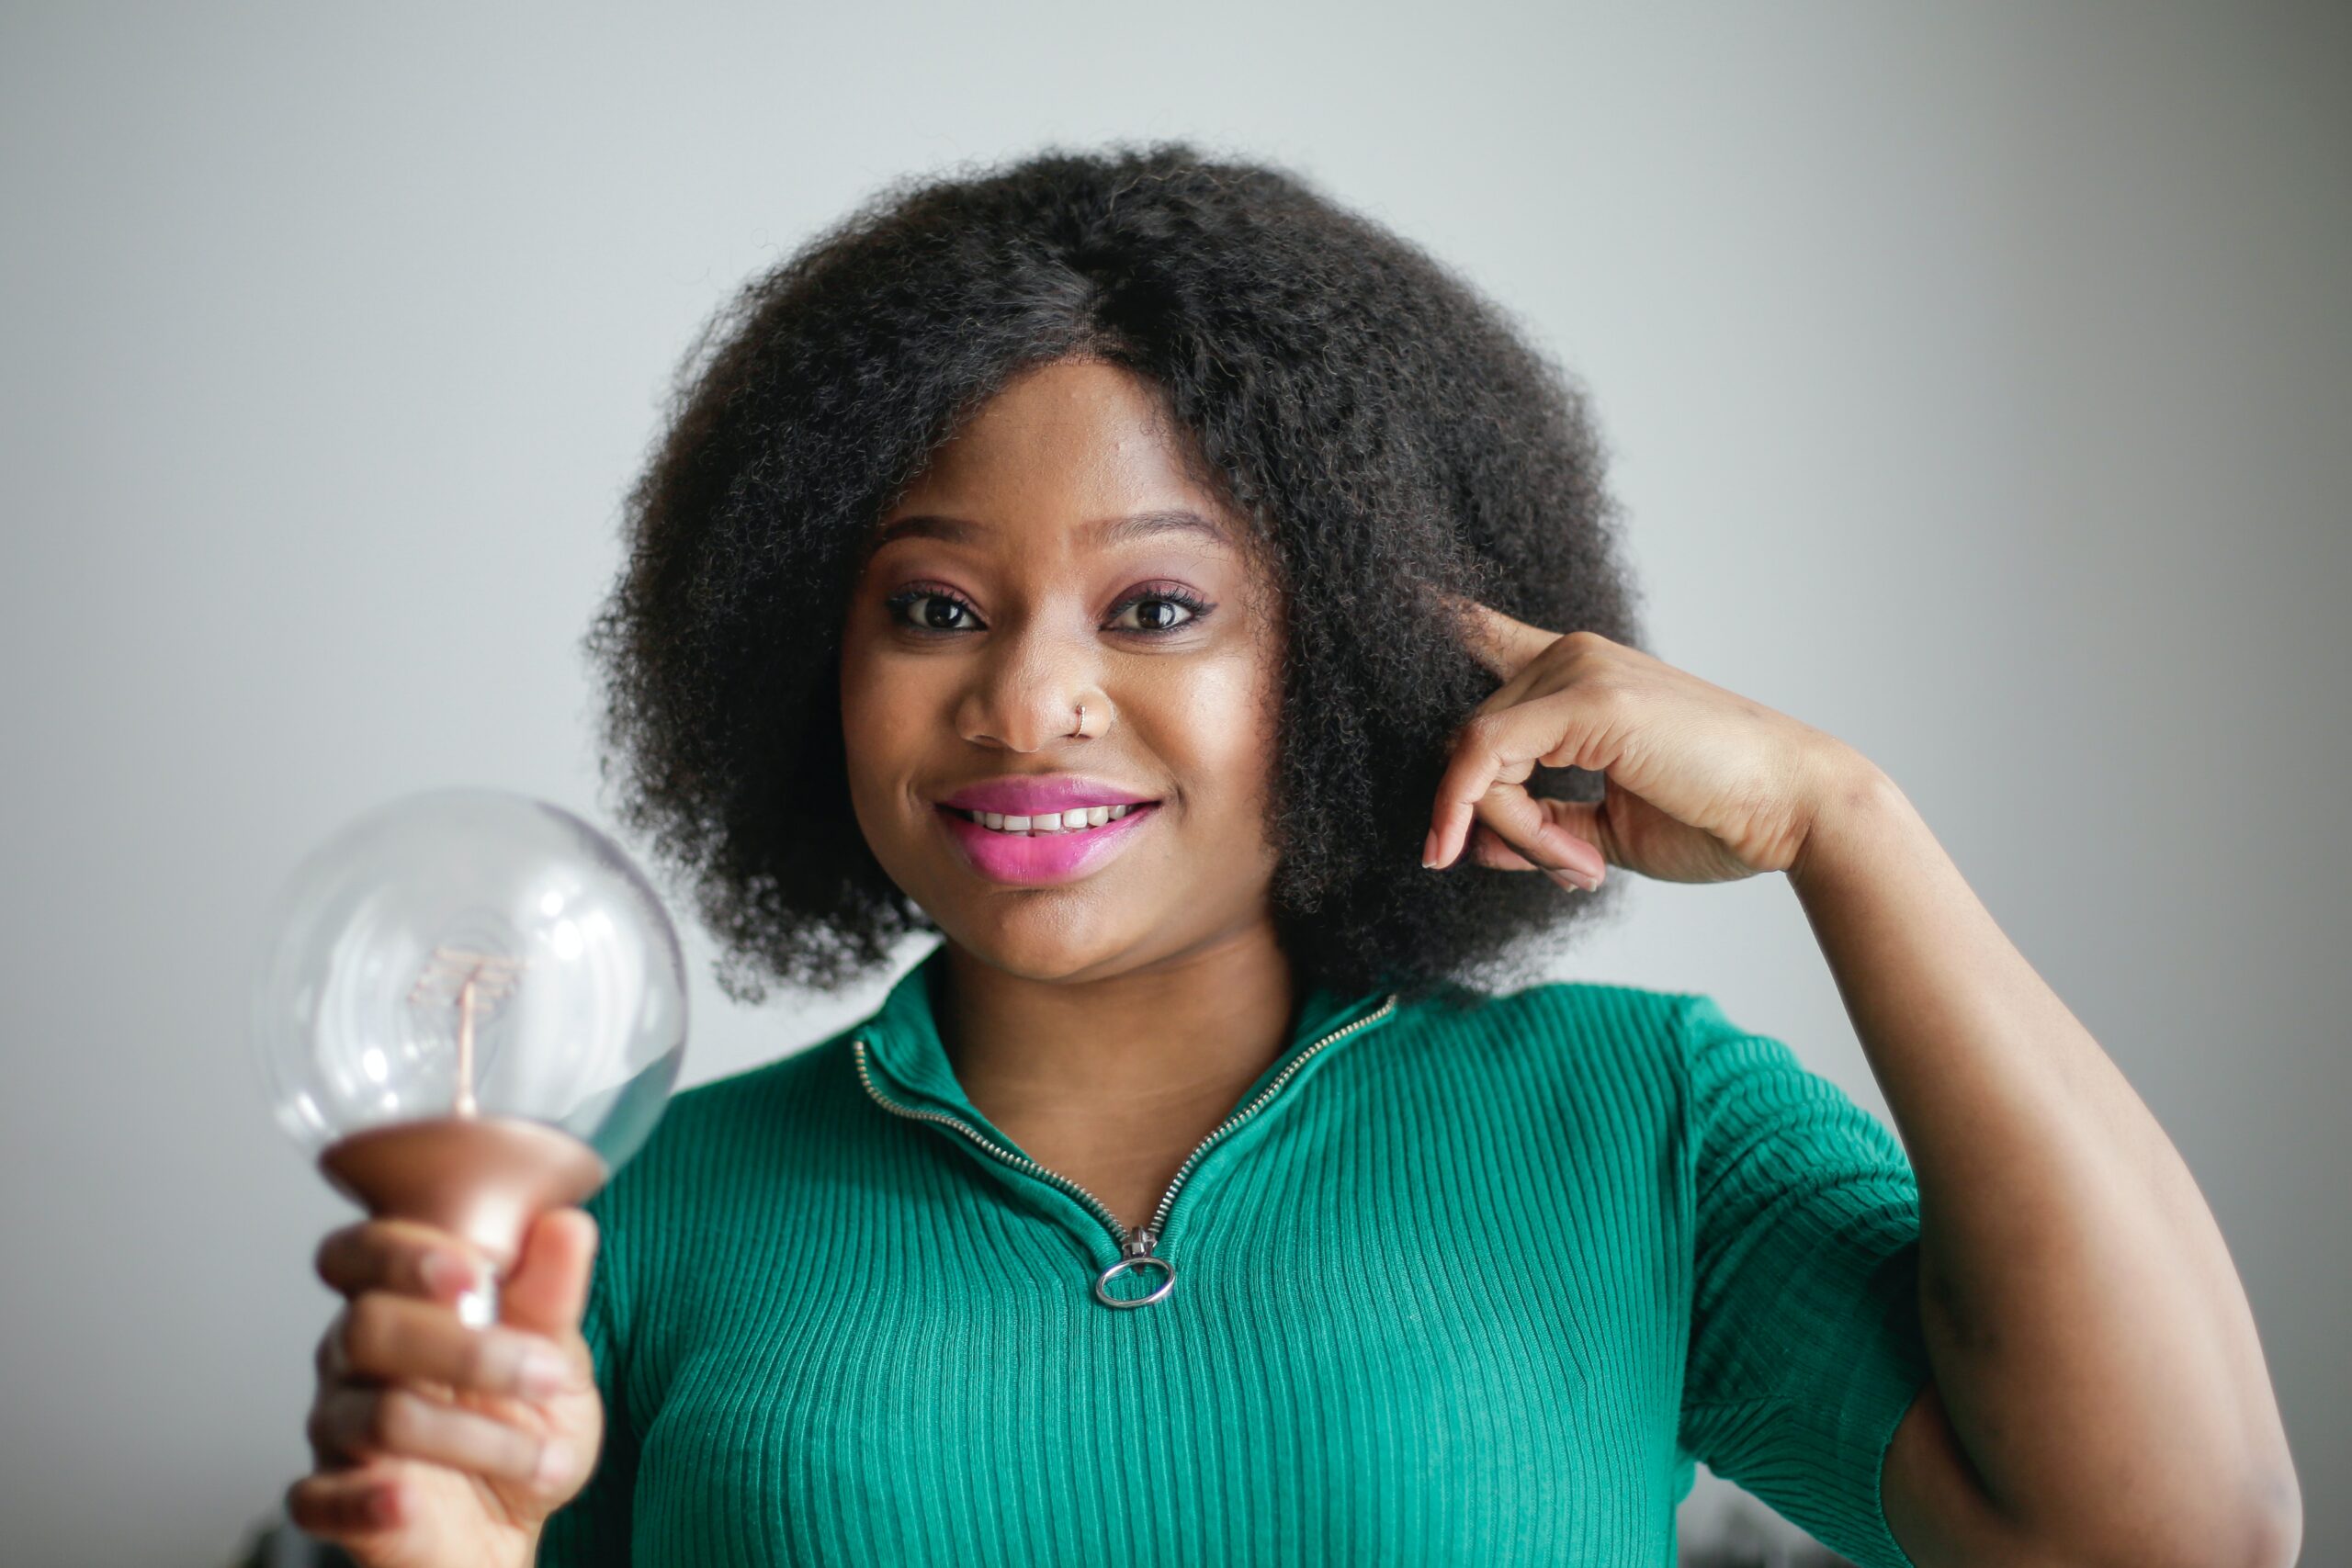 Black, feminine presenting person with a green polo shirt, holding a light bulb and pointing to their head